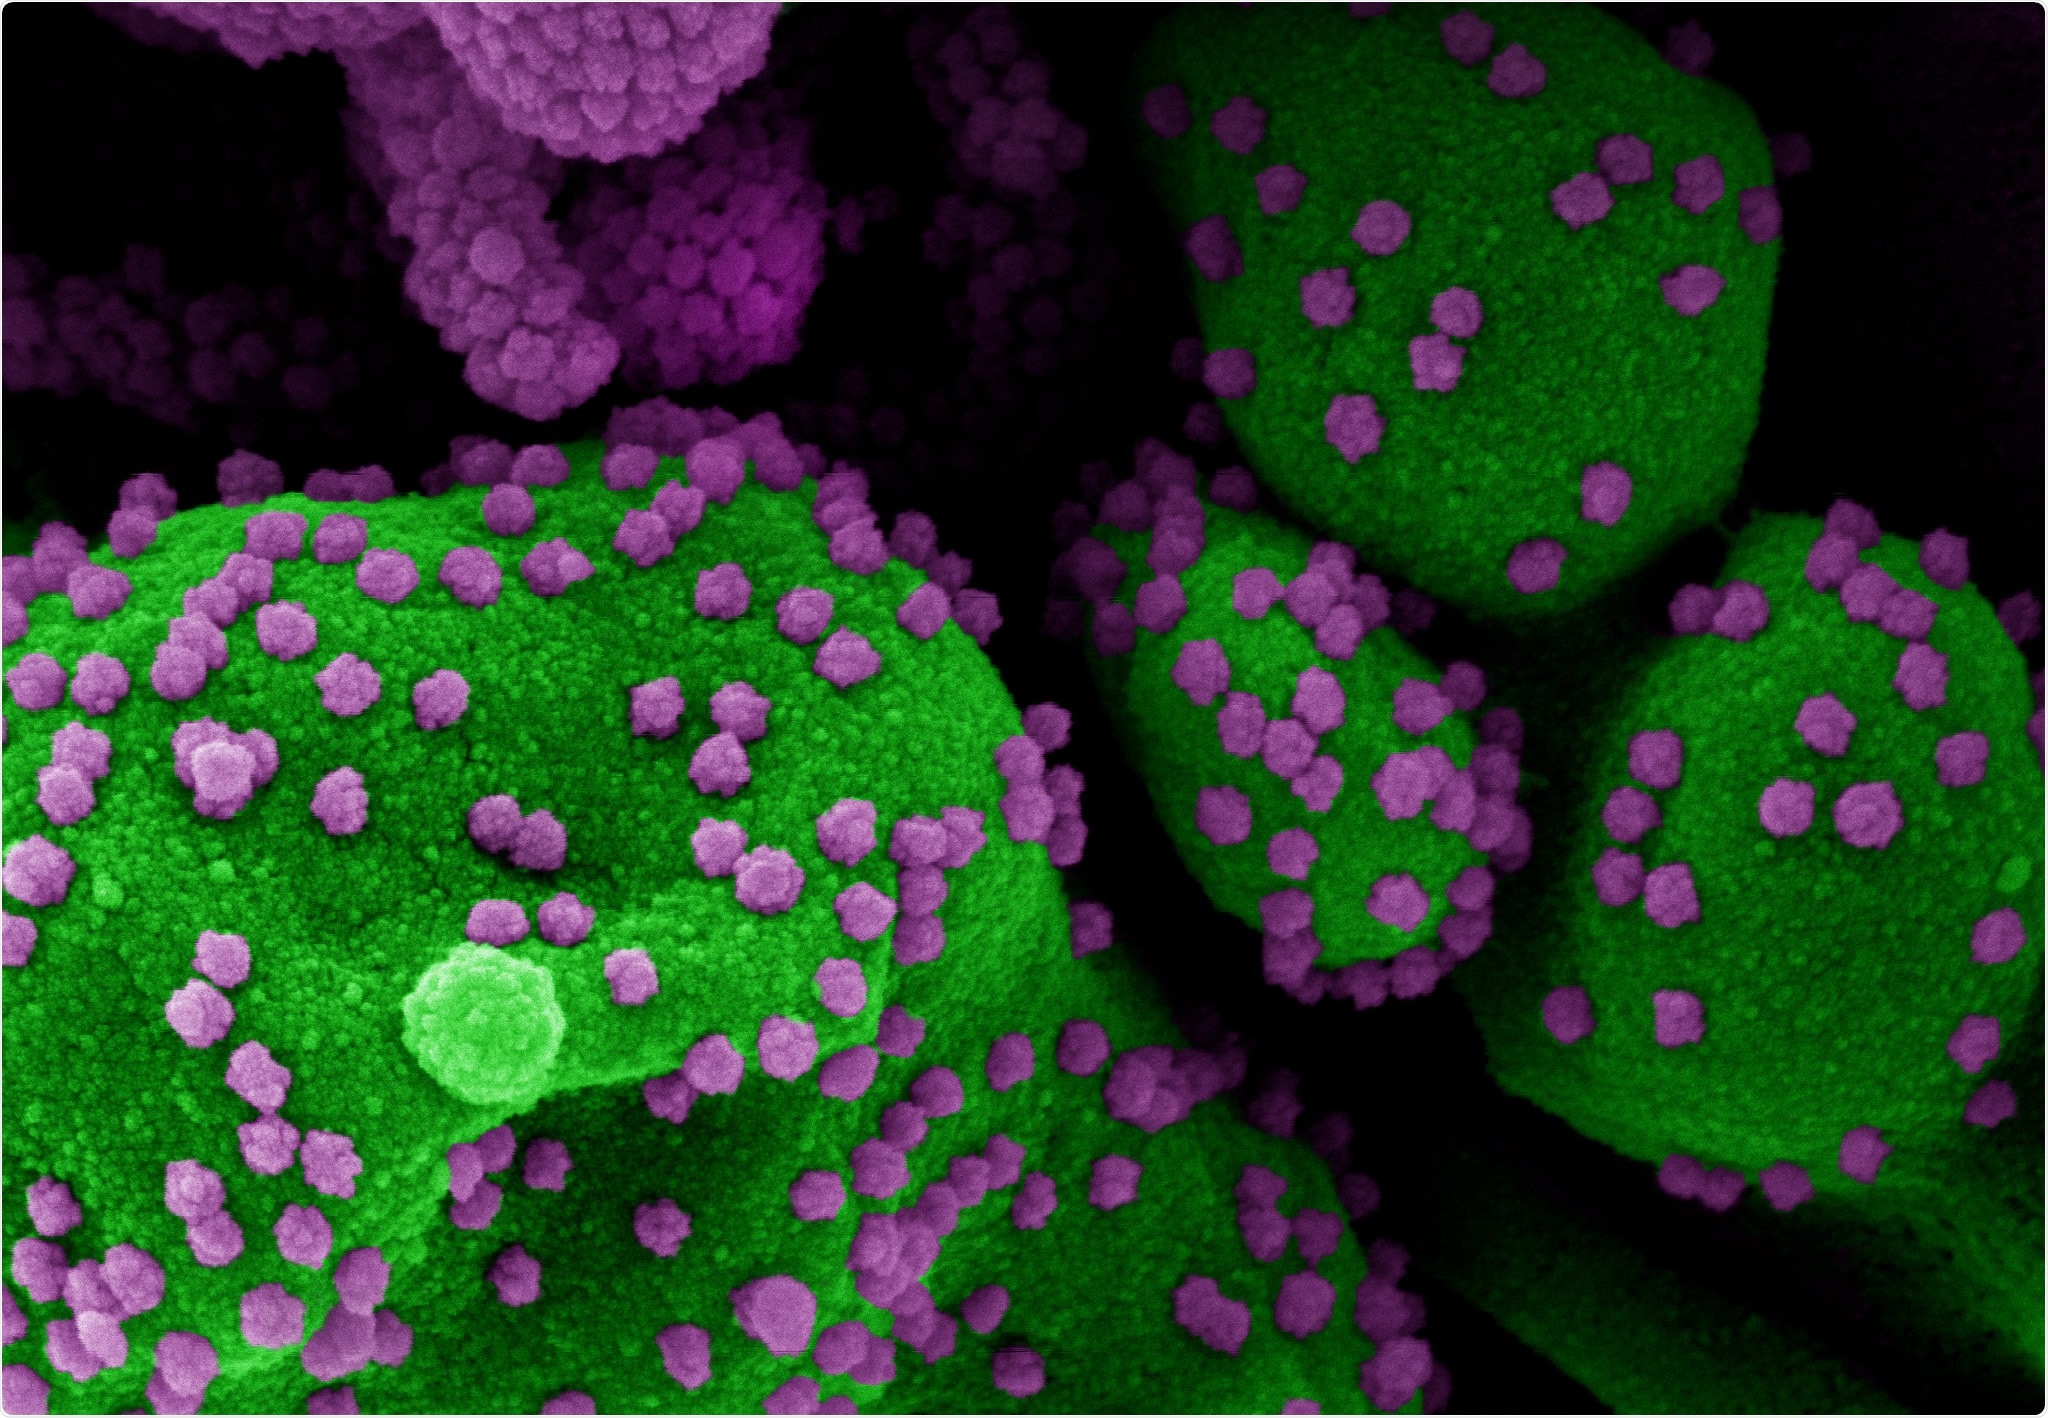 Colorized scanning electron micrograph of an apoptotic cell (green) heavily infected with SARS-CoV-2 virus particles (purple), isolated from a patient sample. Image at the NIAID Integrated Research Facility (IRF) in Fort Detrick, Maryland. Credit: NIAID